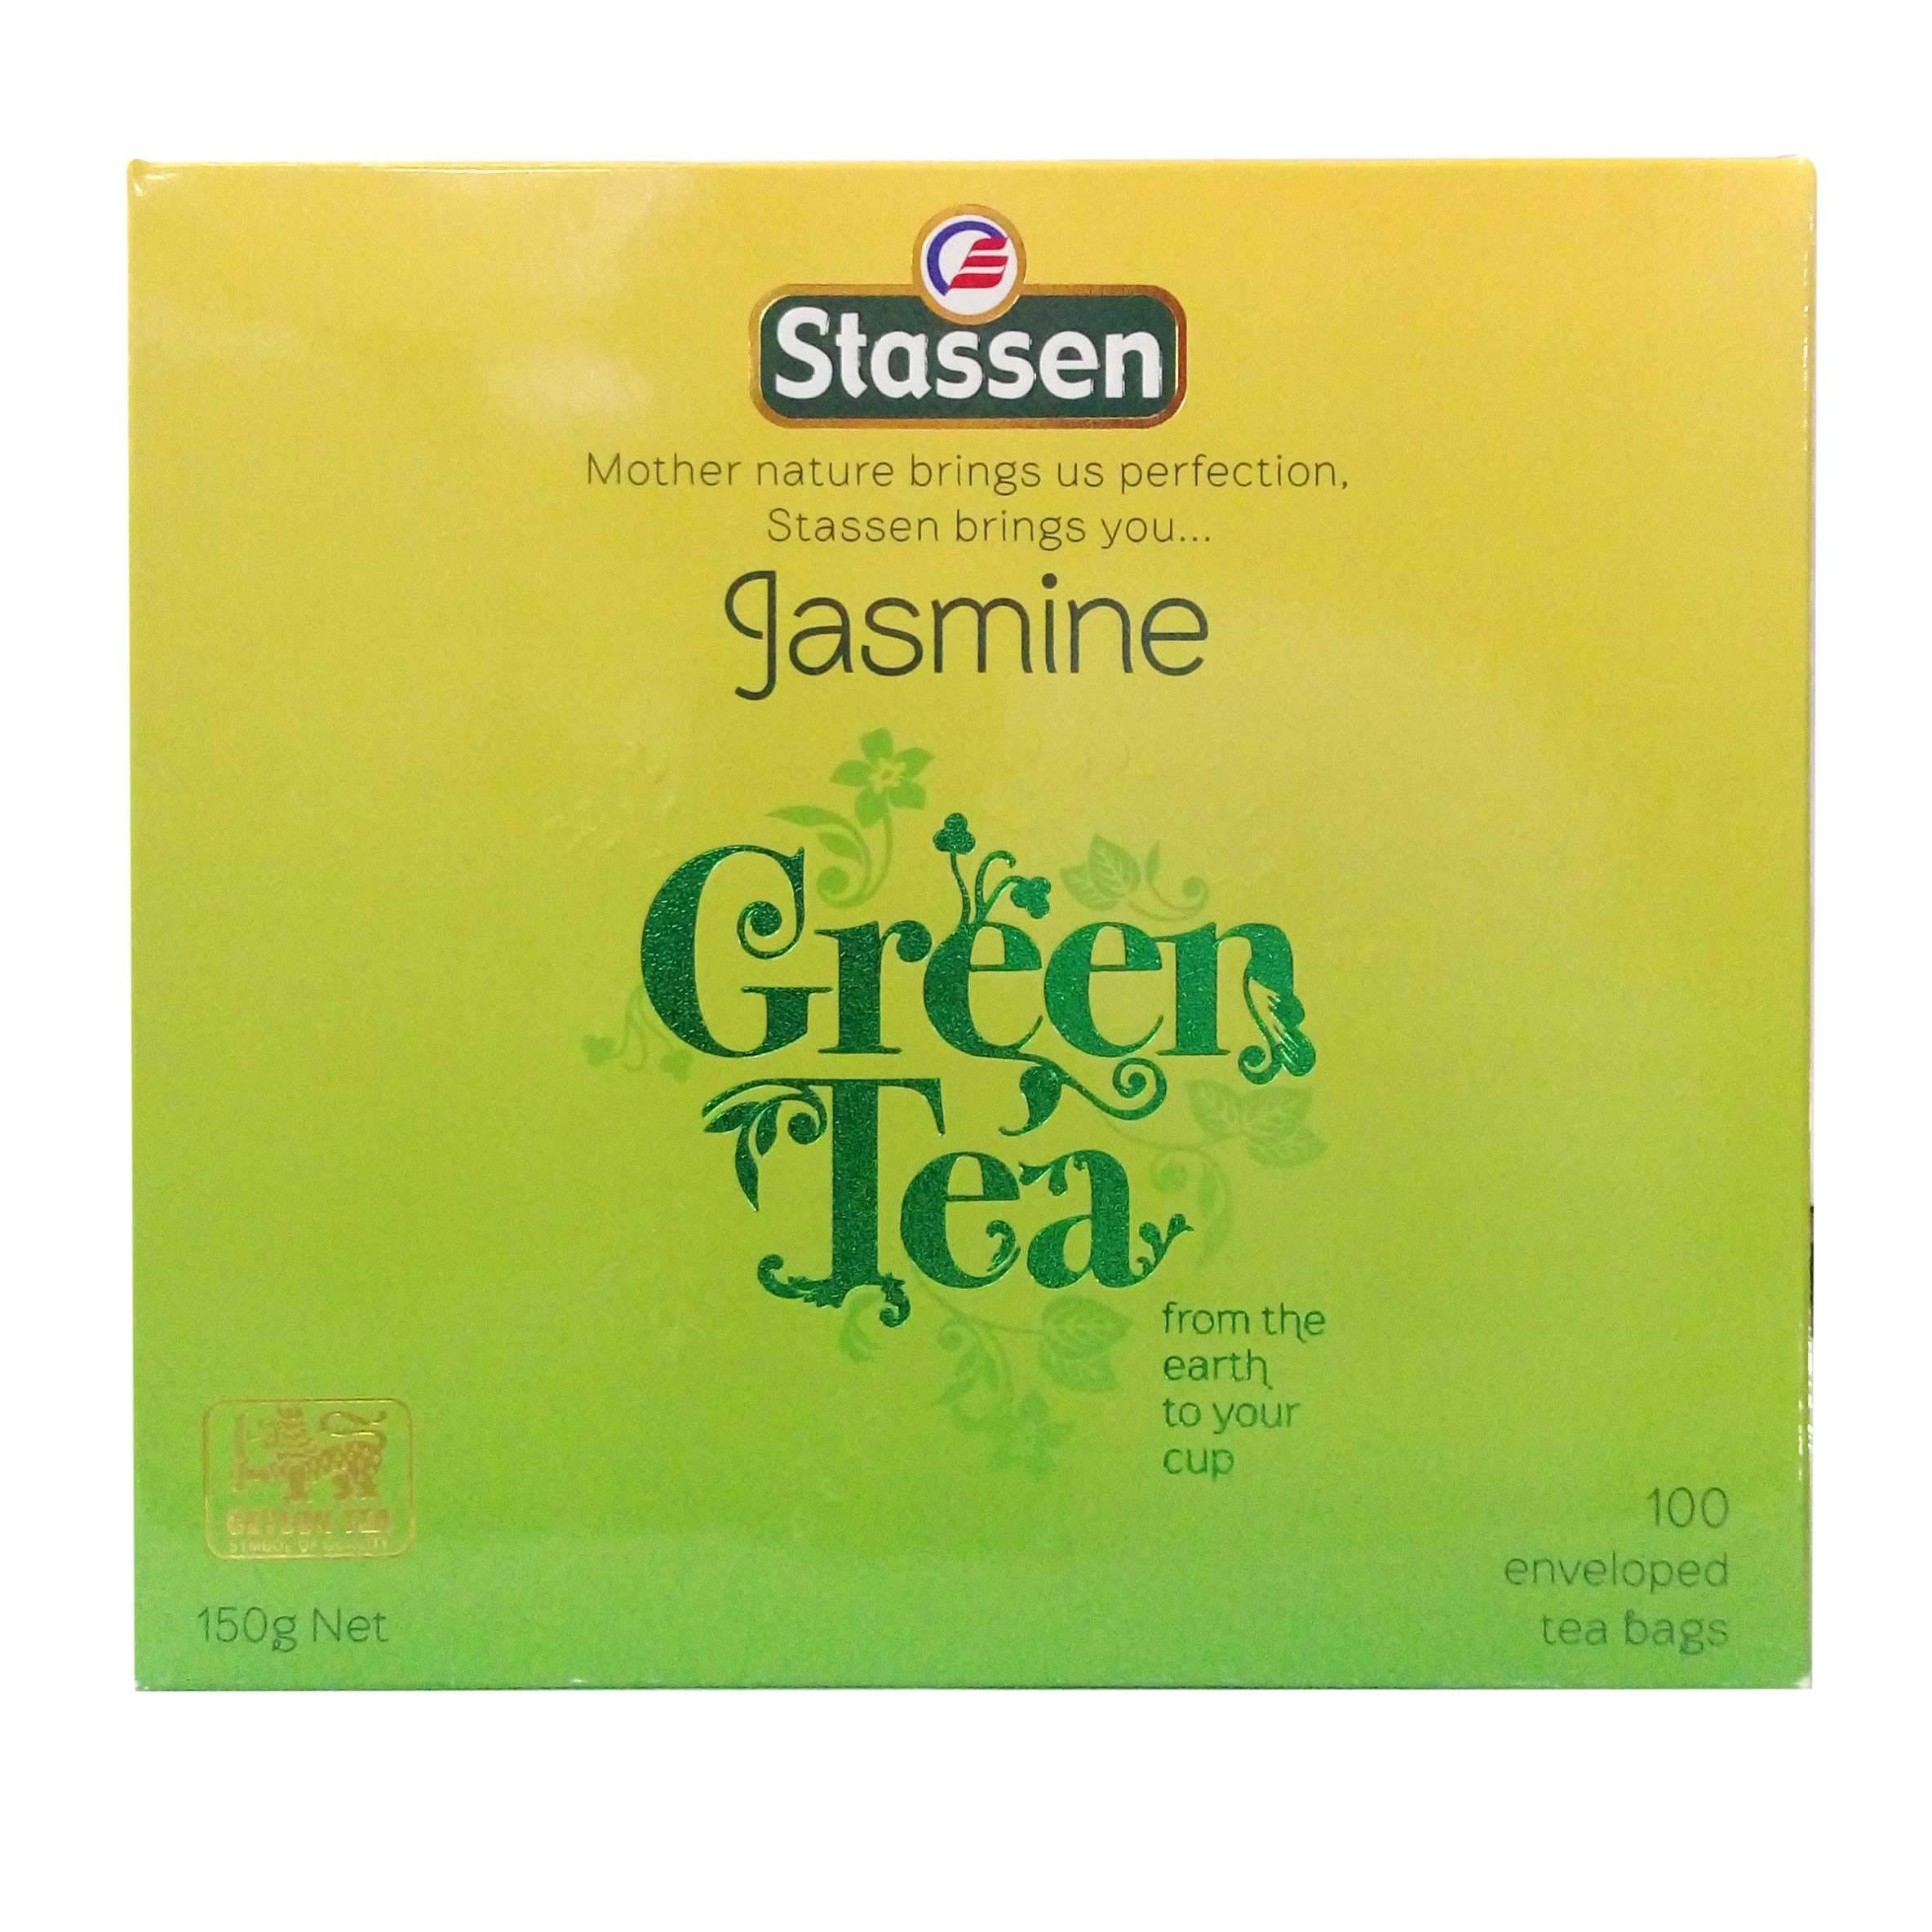 Jasmine Green Tea Contains 100 Enveloped Tea Bags (Package Might Vary)